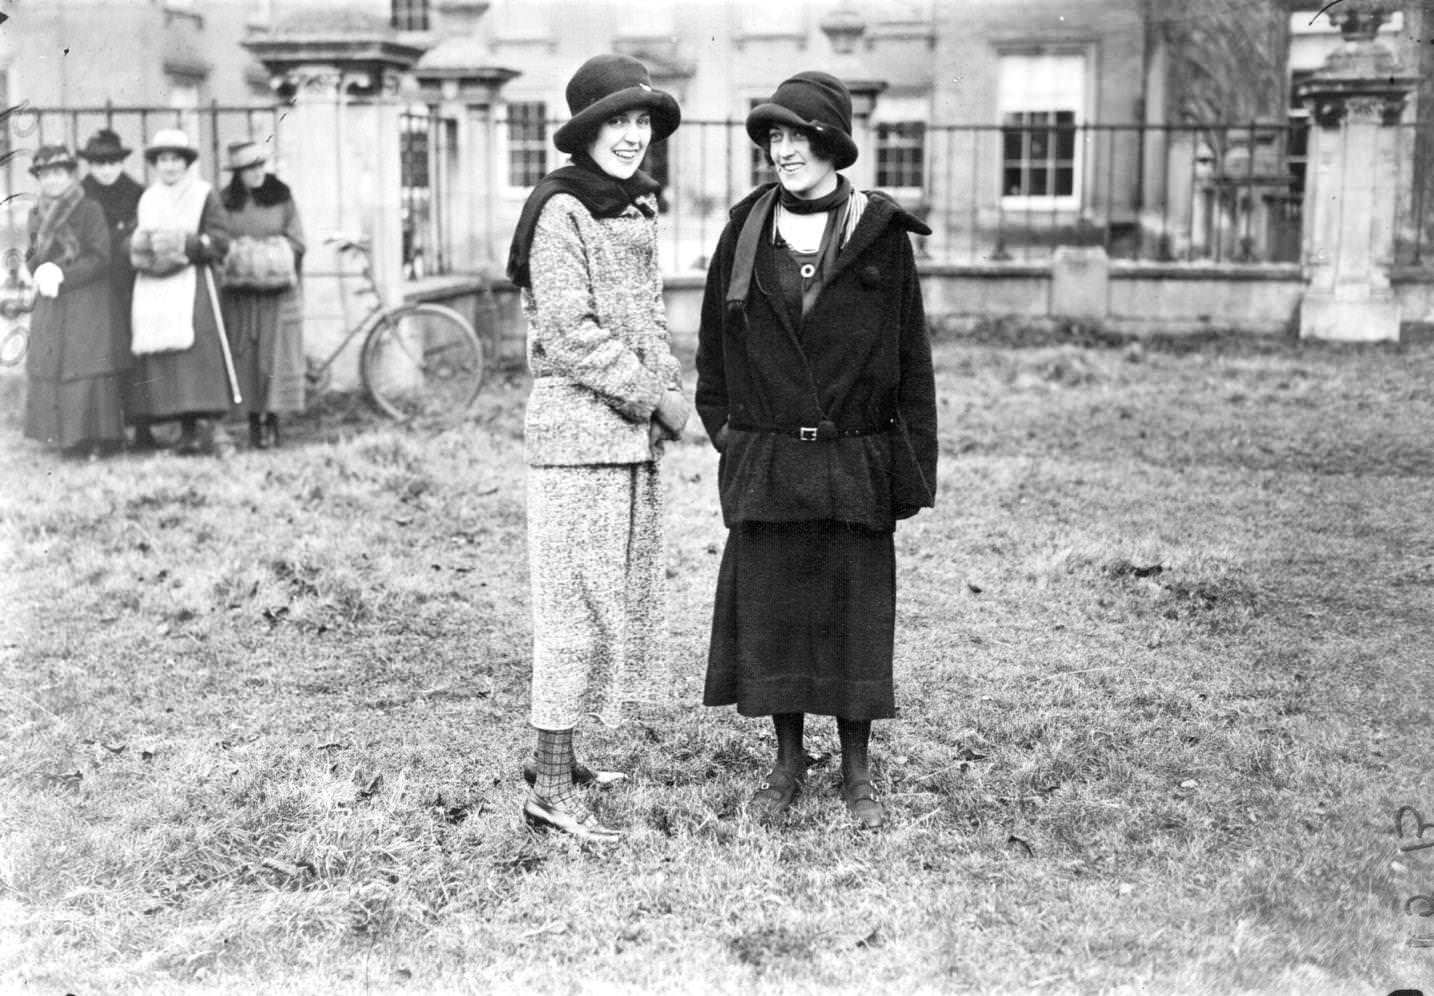 Lady Cynthia Elinor Beatrix Spencer, the second daughter of the 3rd Duke of Abercorn, who married the 7th Earl Spencer in 1919. She is with Lady Annaly, at the Pytchley Hounds meet at Althorp Park, 1923